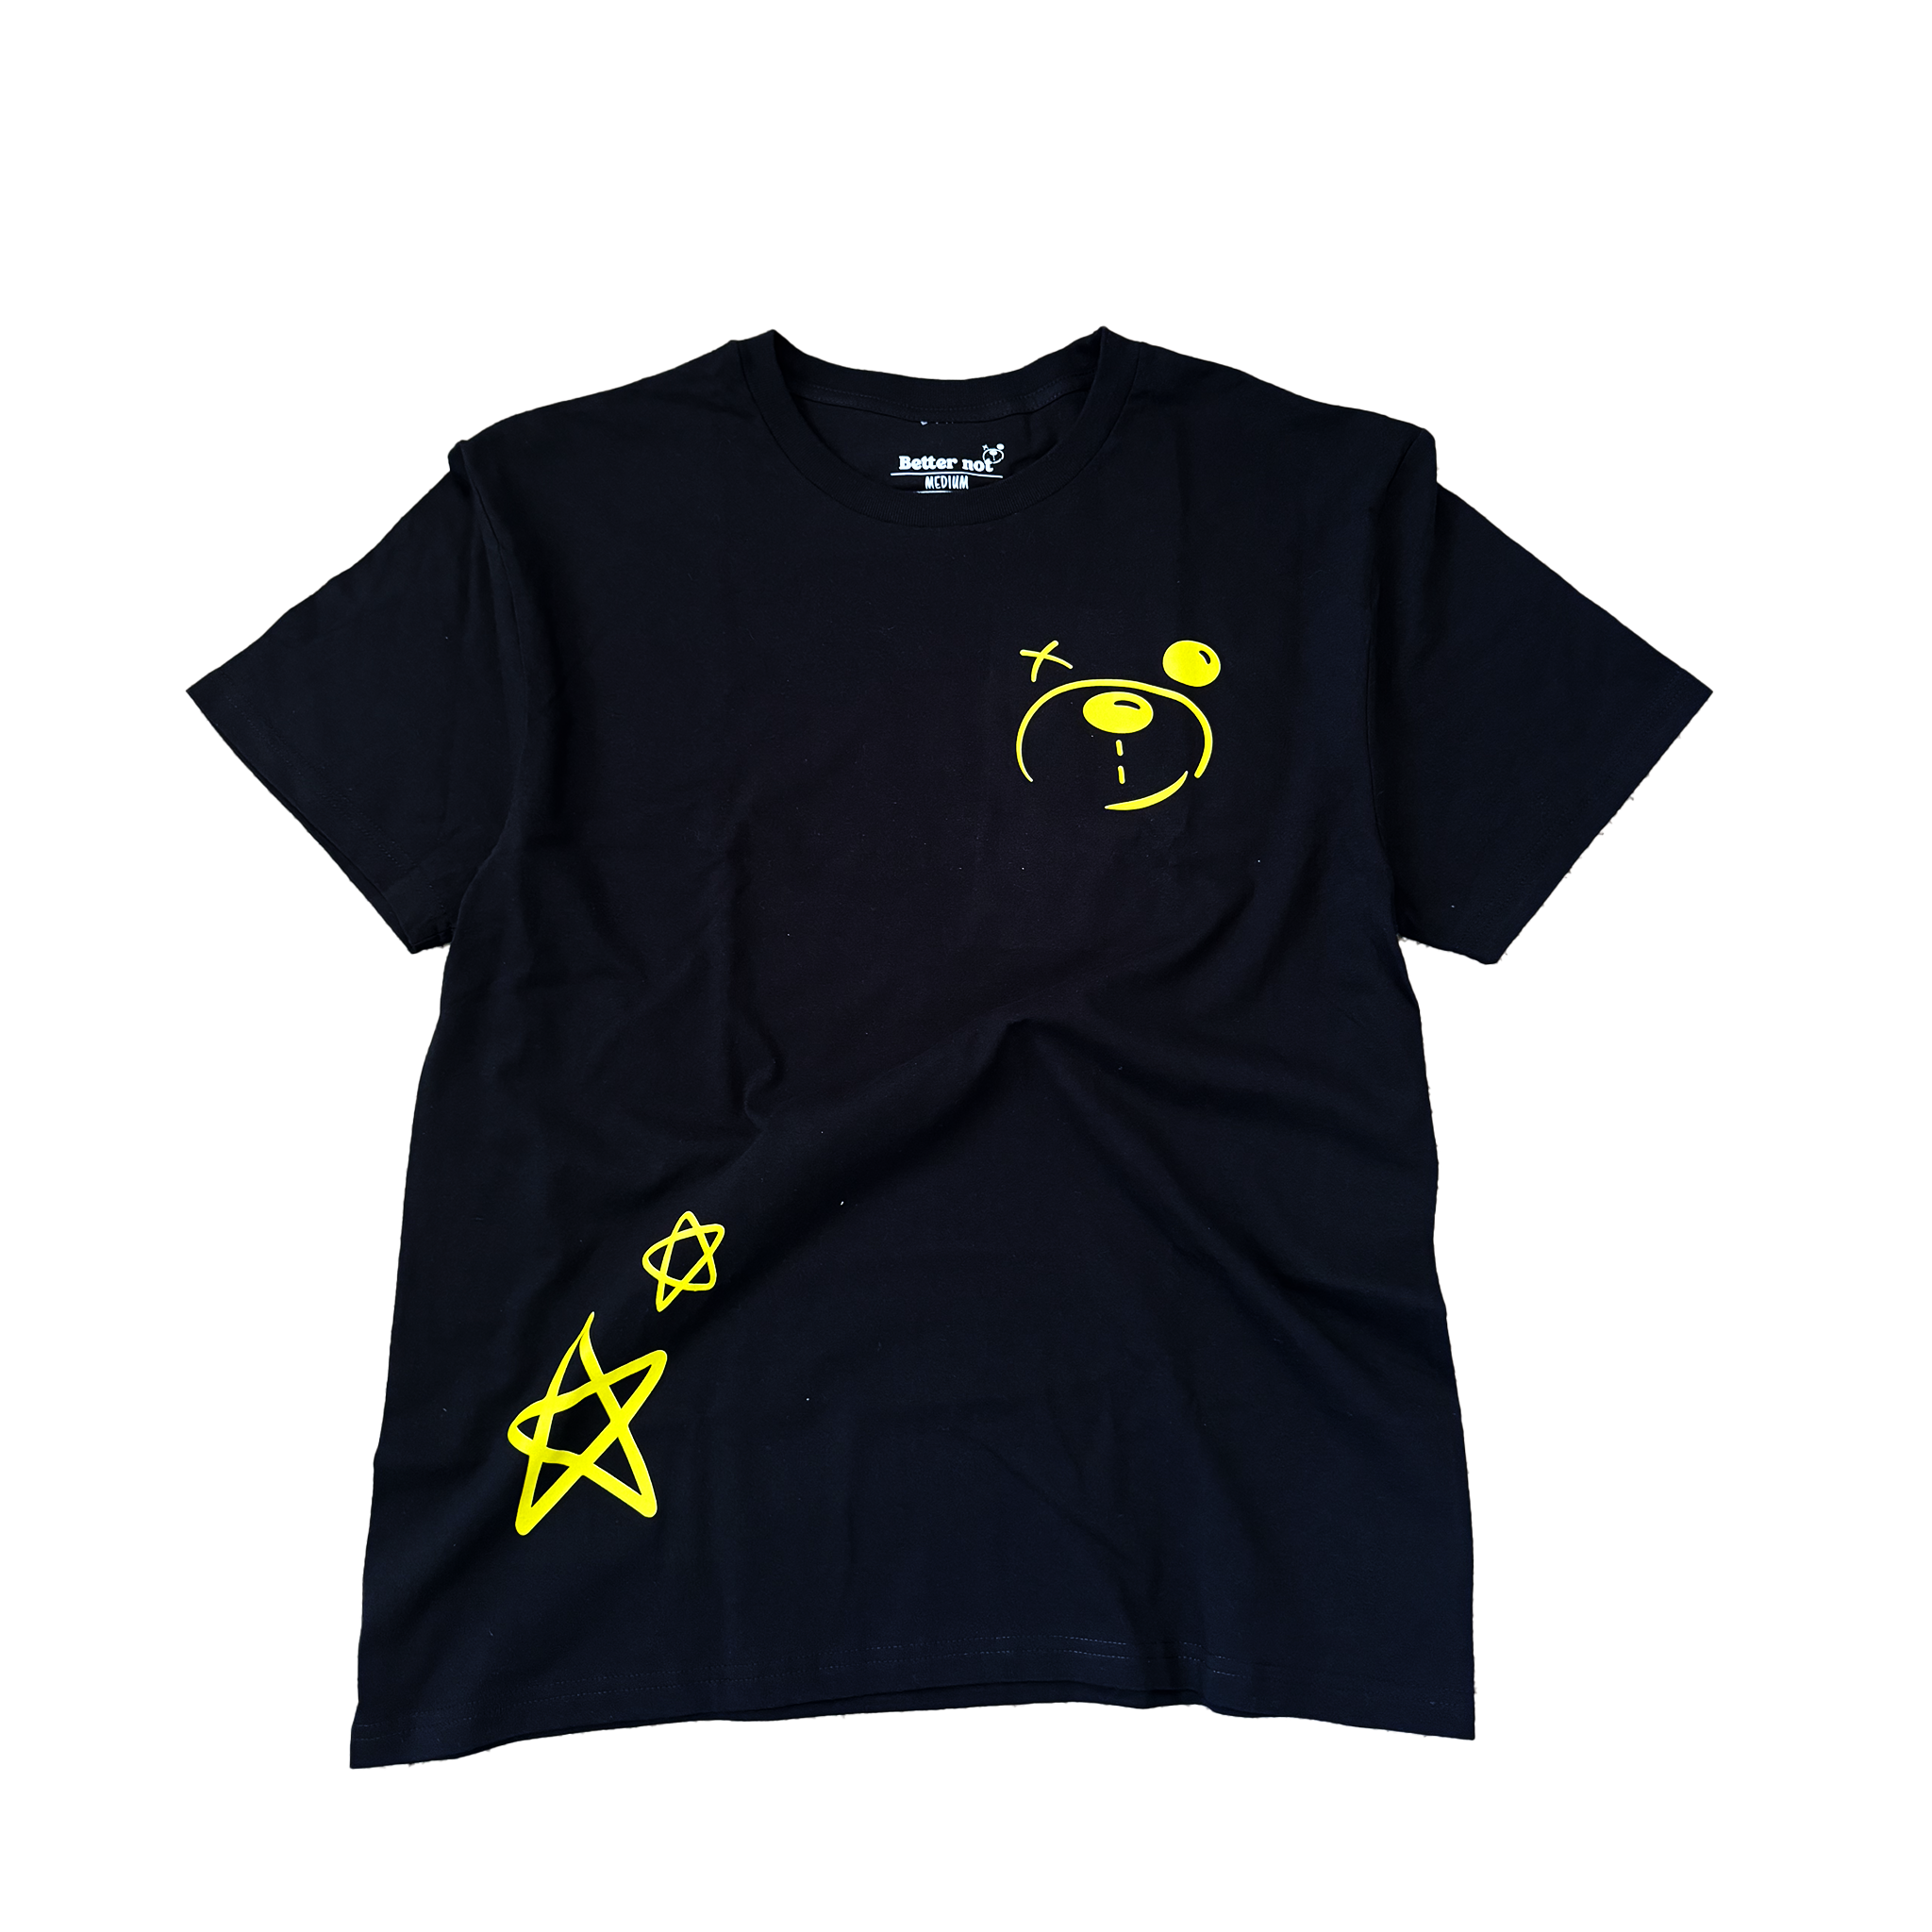 Better not's Don't Worry Tee, an oversized t-shirt made of 100% cotton jersey in black color, featuring a yellow cartoon face and two star symbols on the front, is lying flat on a light-colored carpet.